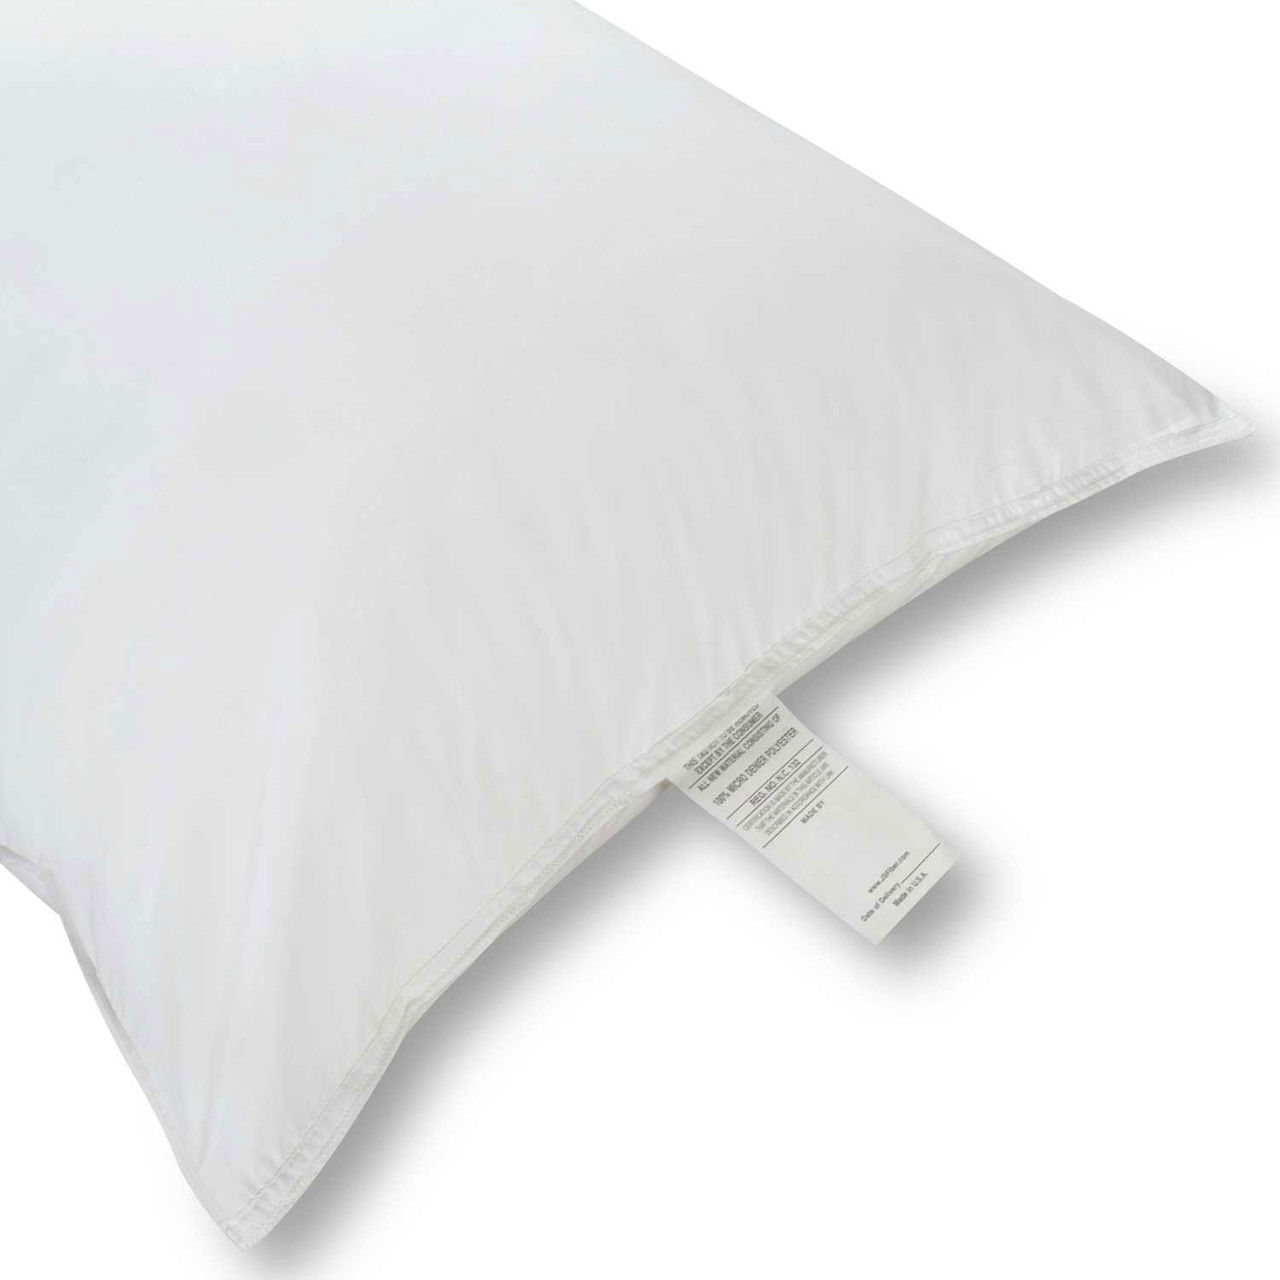 Can you list some features of the Ultra Down Pillow, specifically the Synthetic version?